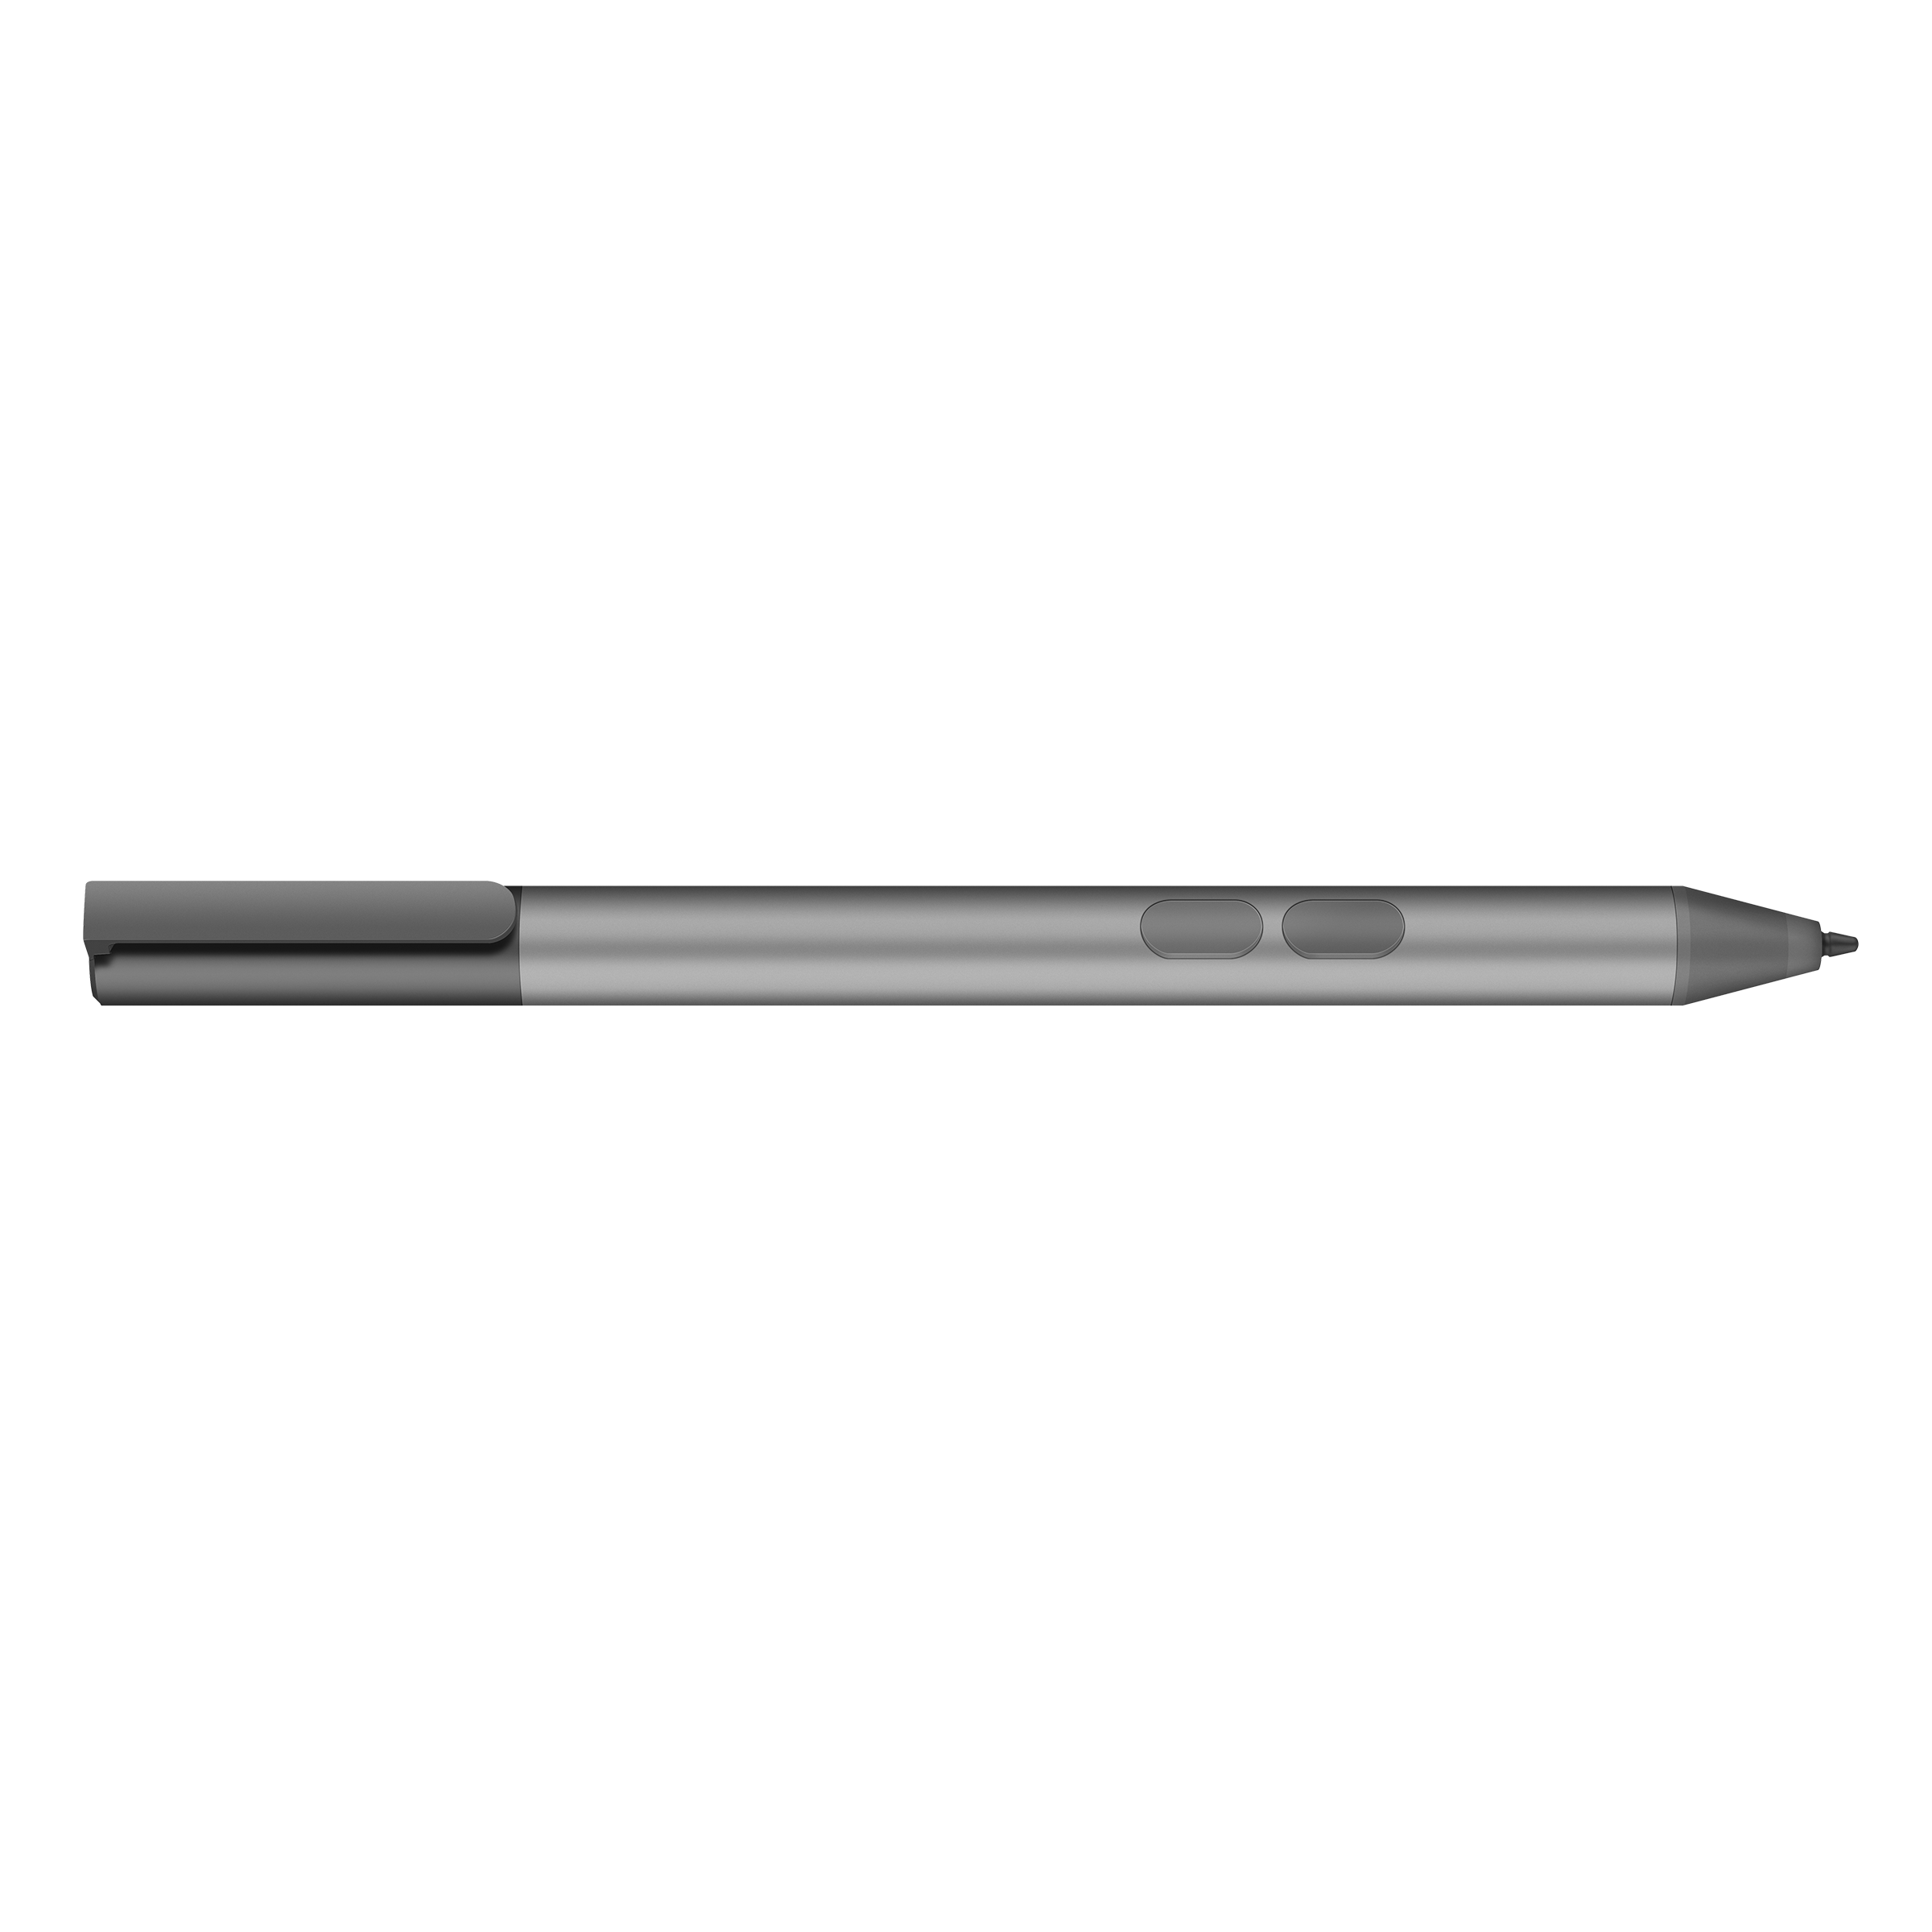 BoxWave Metallic Silver Electronic Stylus with Ultra Fine Tip for ASUS VivoBook Flip 14 TP410UF AccuPoint Active Stylus ASUS VivoBook Flip 14 TP410UF Stylus Pen 